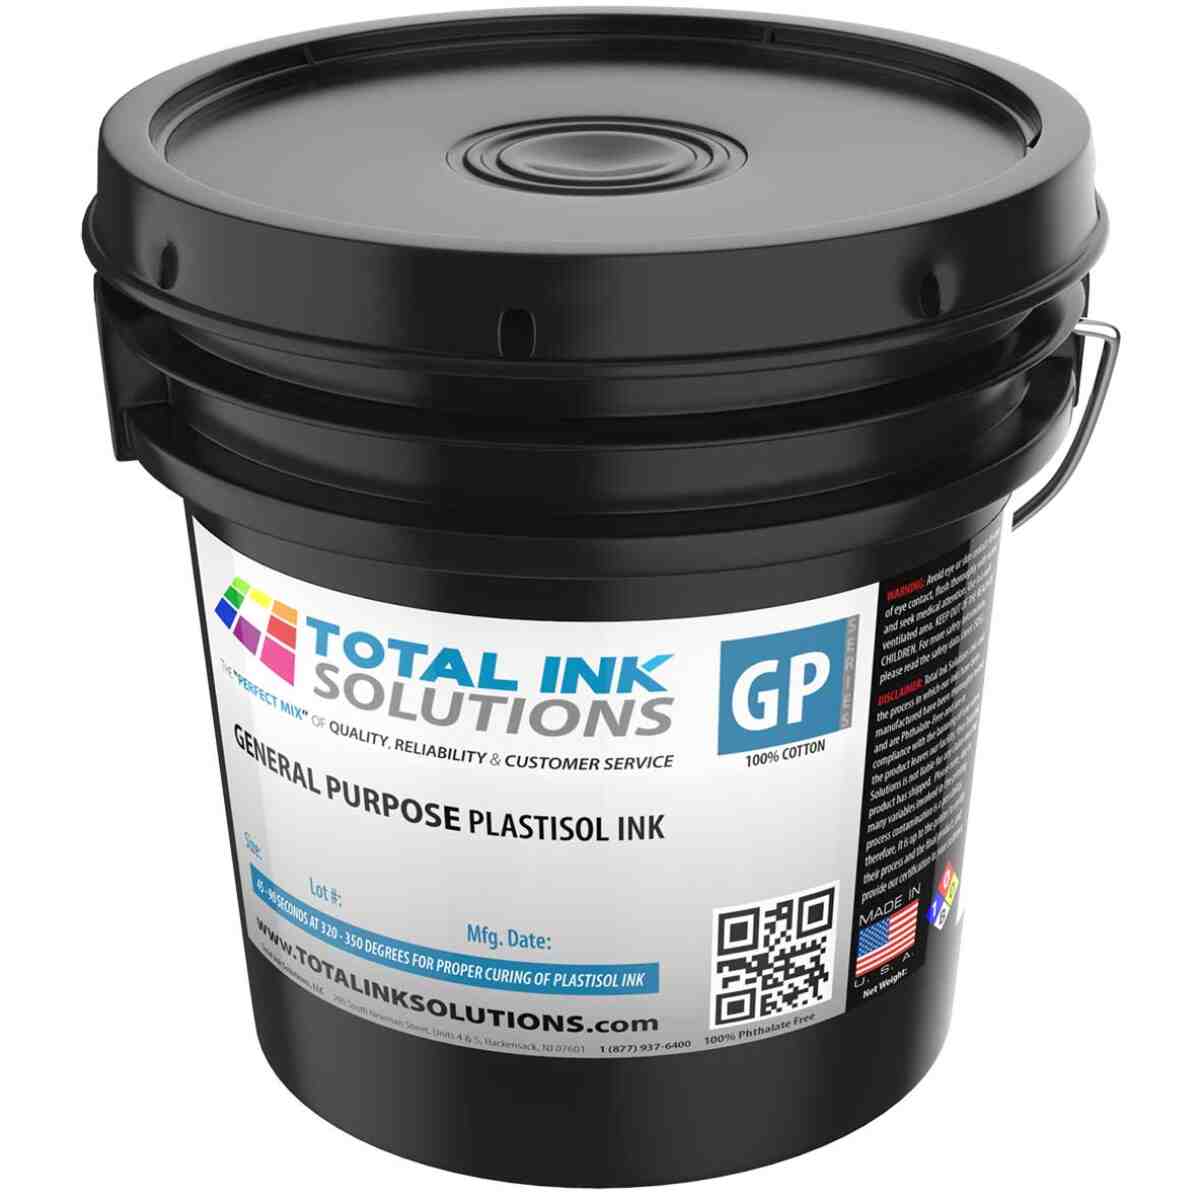 General Purpose Plastisol Ink - Mixing Base TOTAL INK SOLUTIONS®